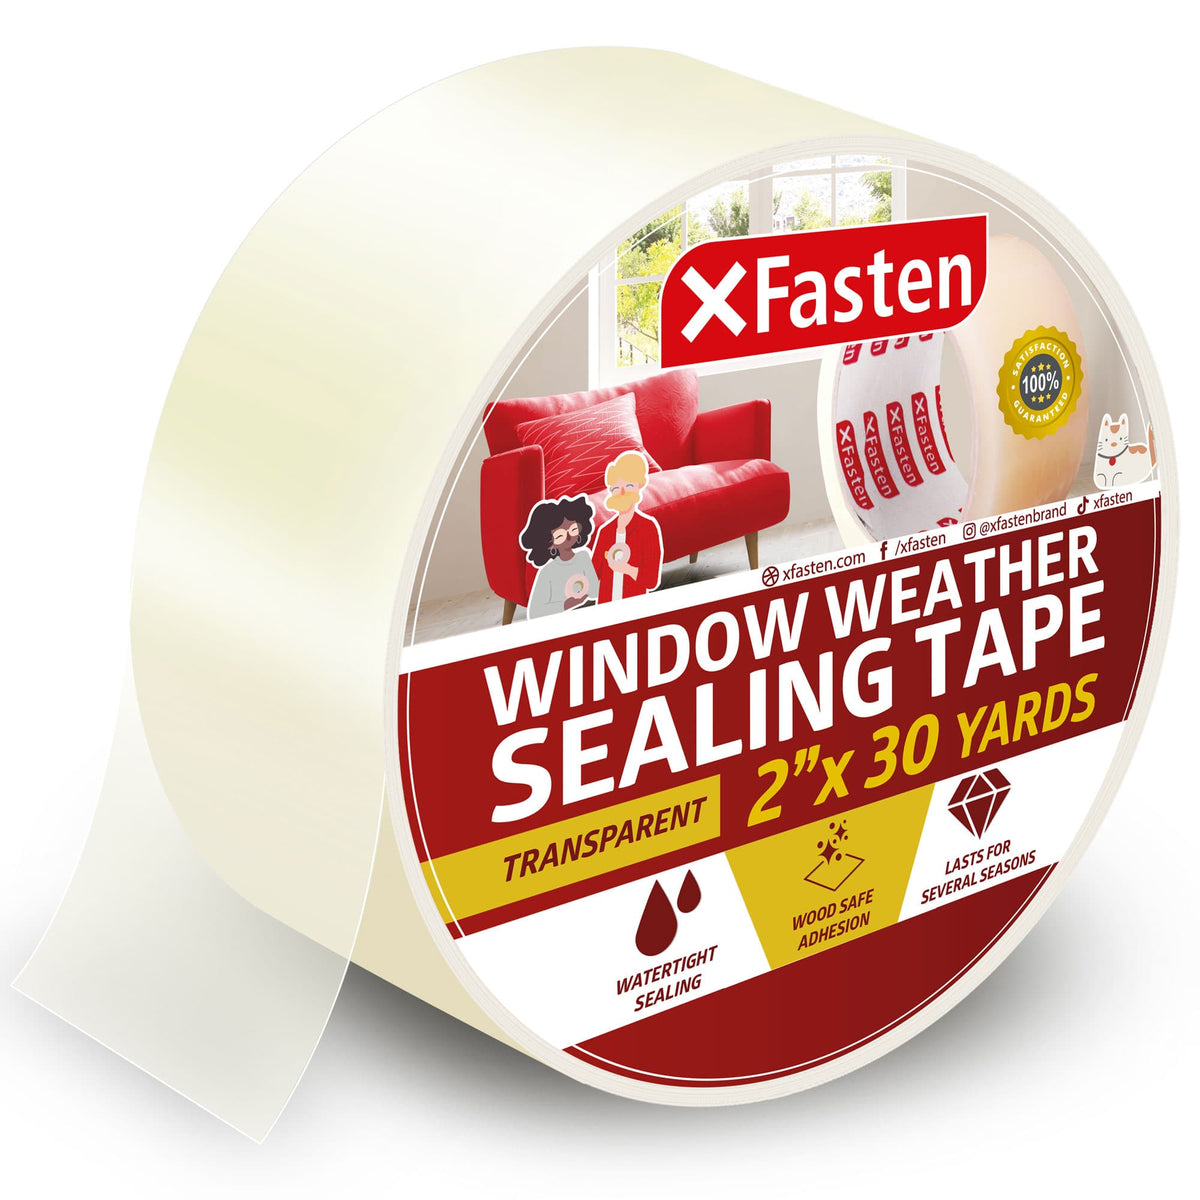 XFasten Fabric and Vinyl Repair Tape, Clear, 3-Inches by 20-Inches (2-Set)